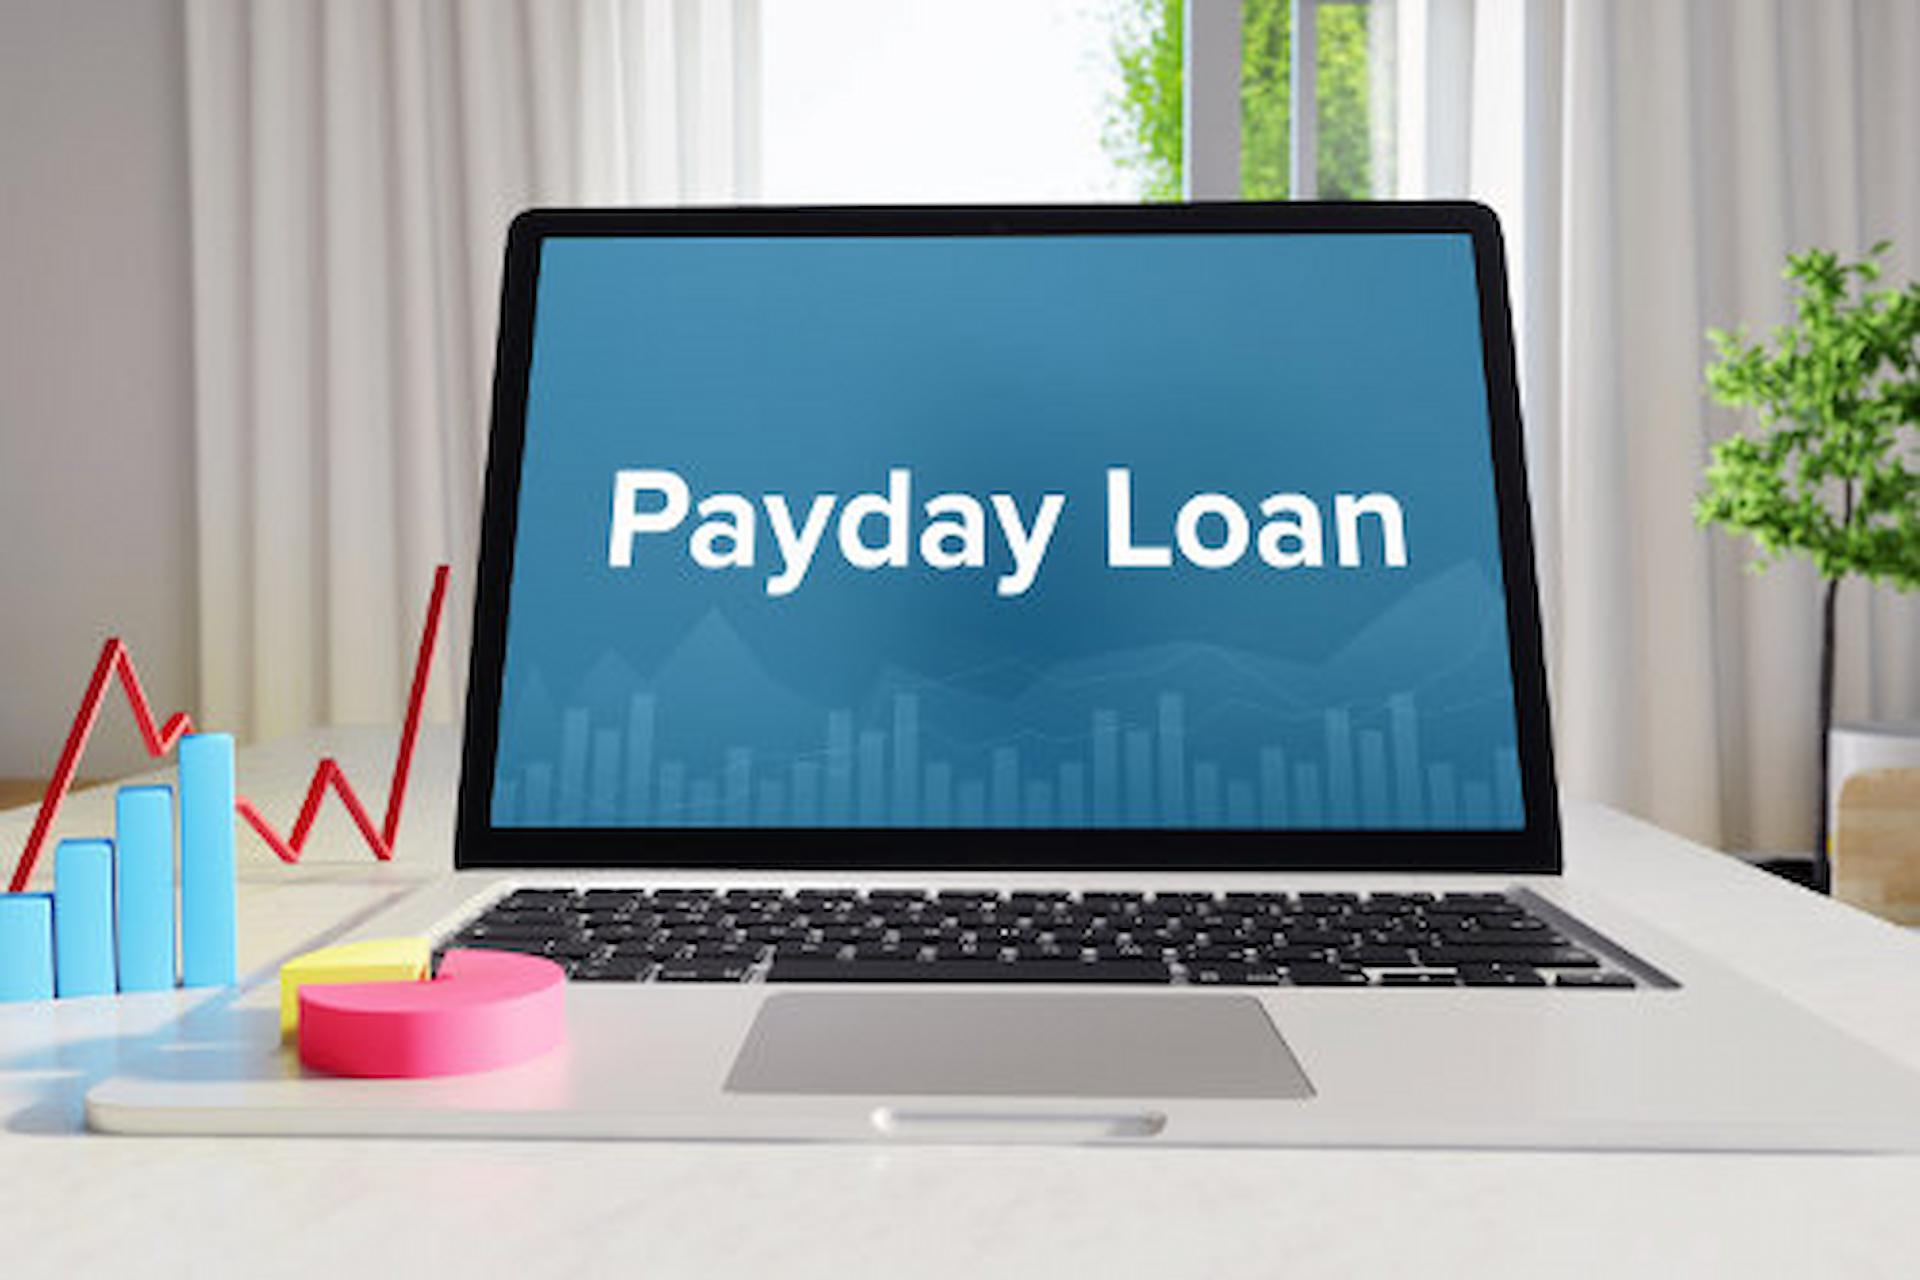 What Are Payday Loans And How Do They Work?